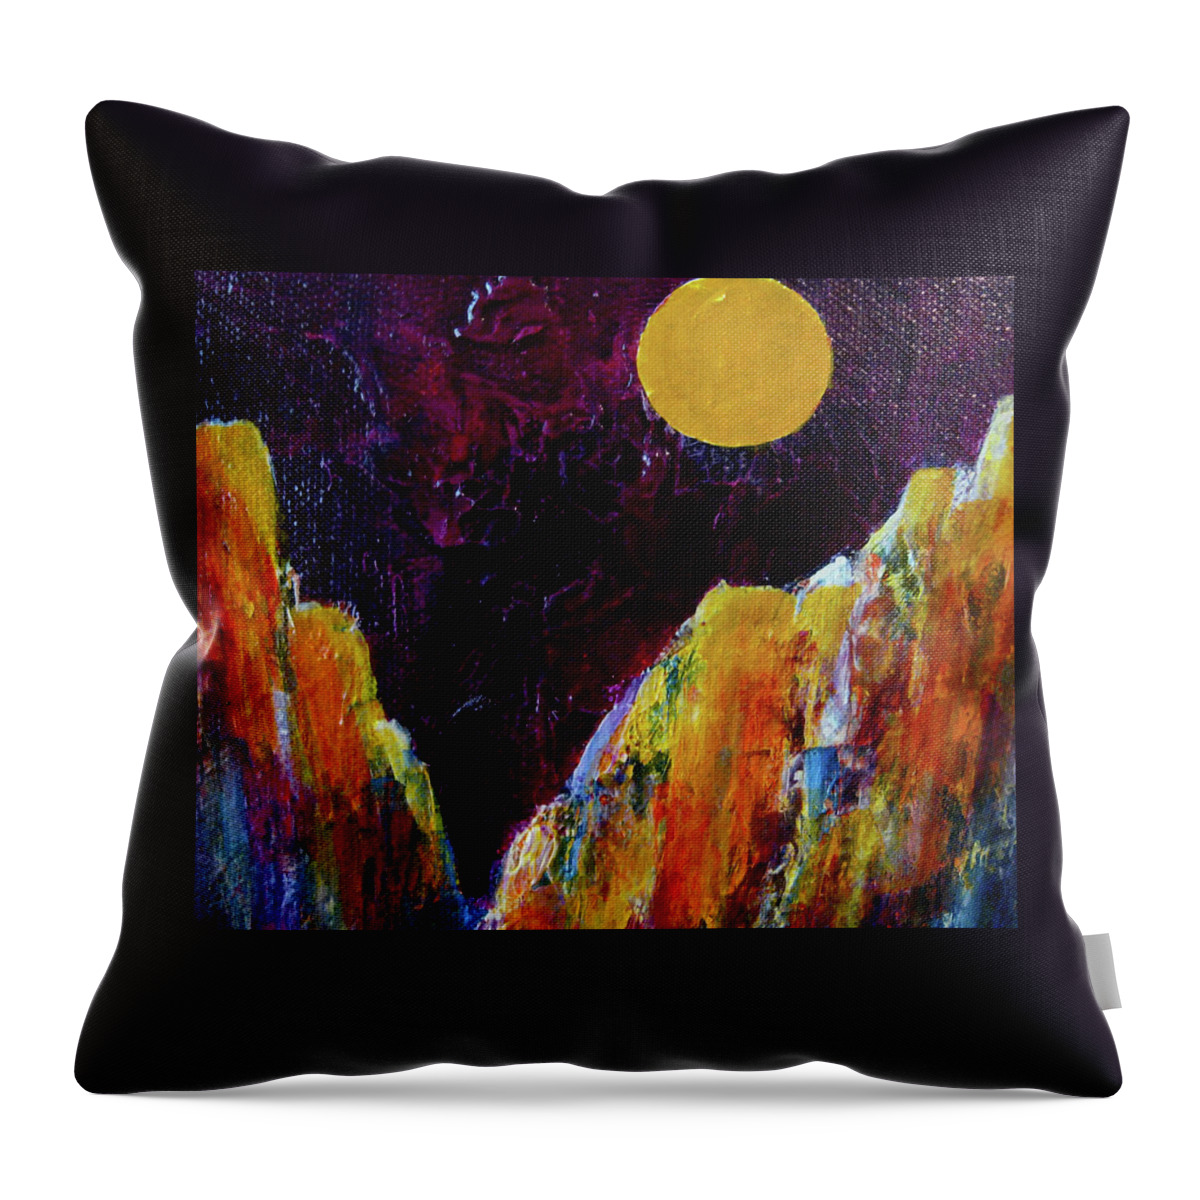 Canyon Throw Pillow featuring the painting Moon Canyon by Janice Nabors Raiteri